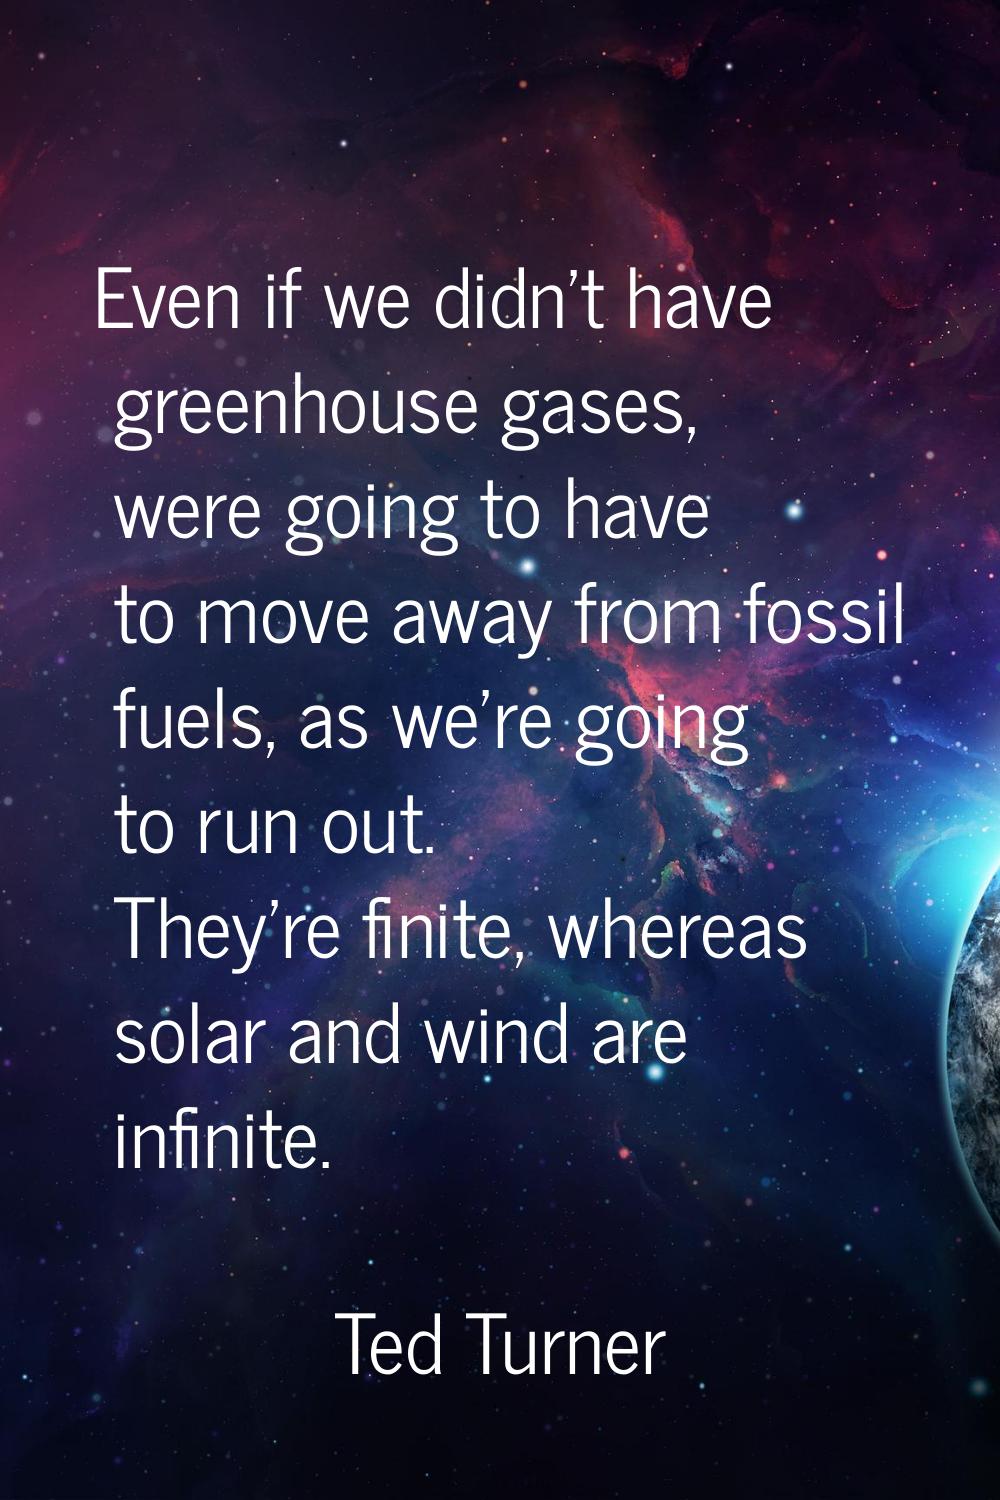 Even if we didn't have greenhouse gases, were going to have to move away from fossil fuels, as we'r